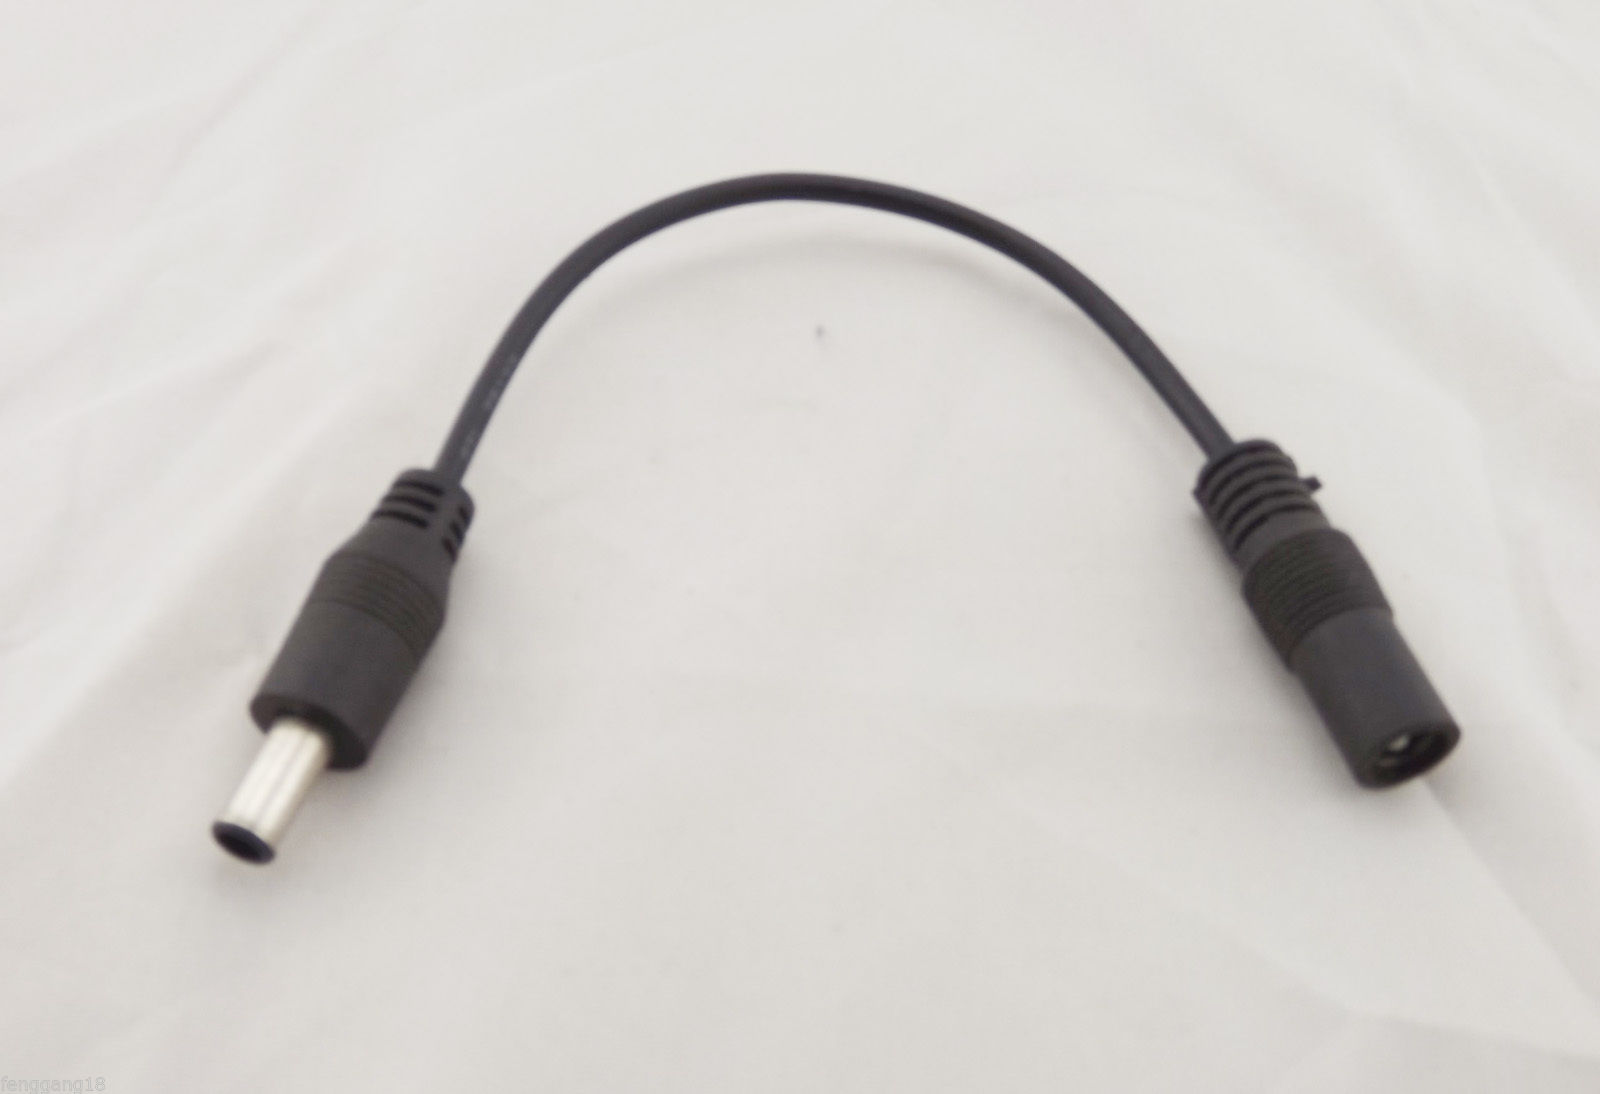 DC Power Adapter Cable 5.5x2.1mm Female To 6.0 x 4.4mm Male with Pin SONY Laptop